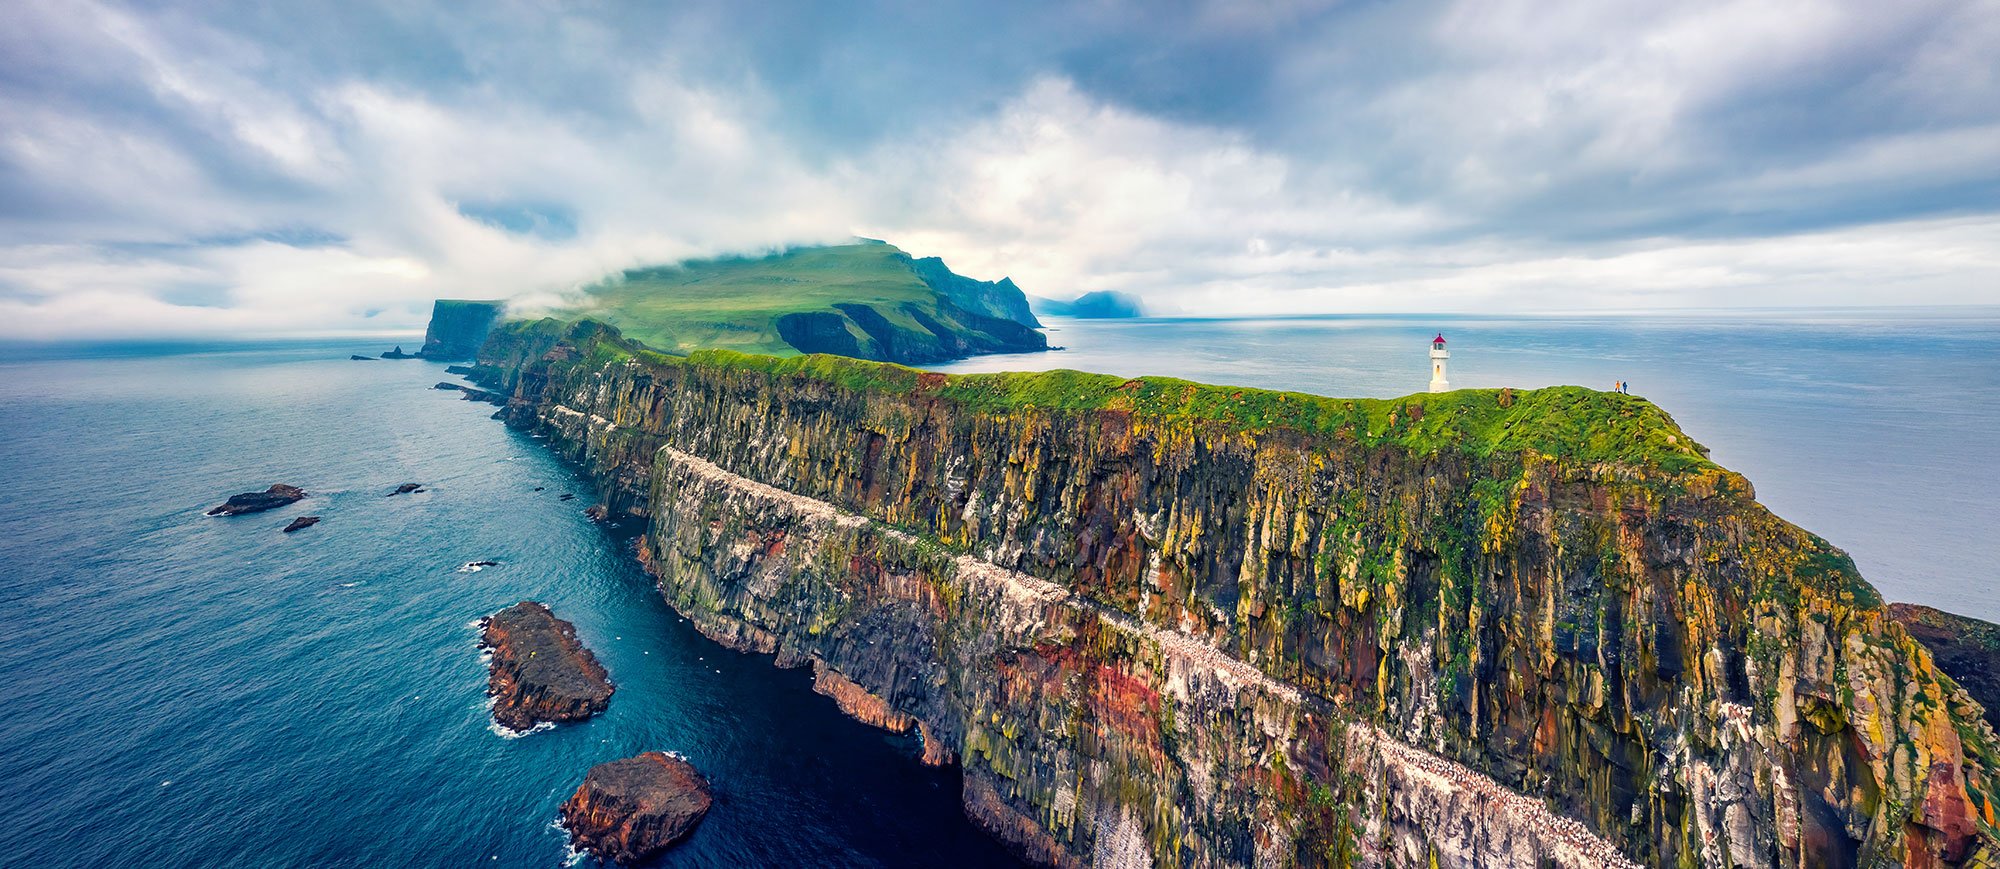 Grassy Cliff of the Faroe Islands with a Lighthouse in the distance.